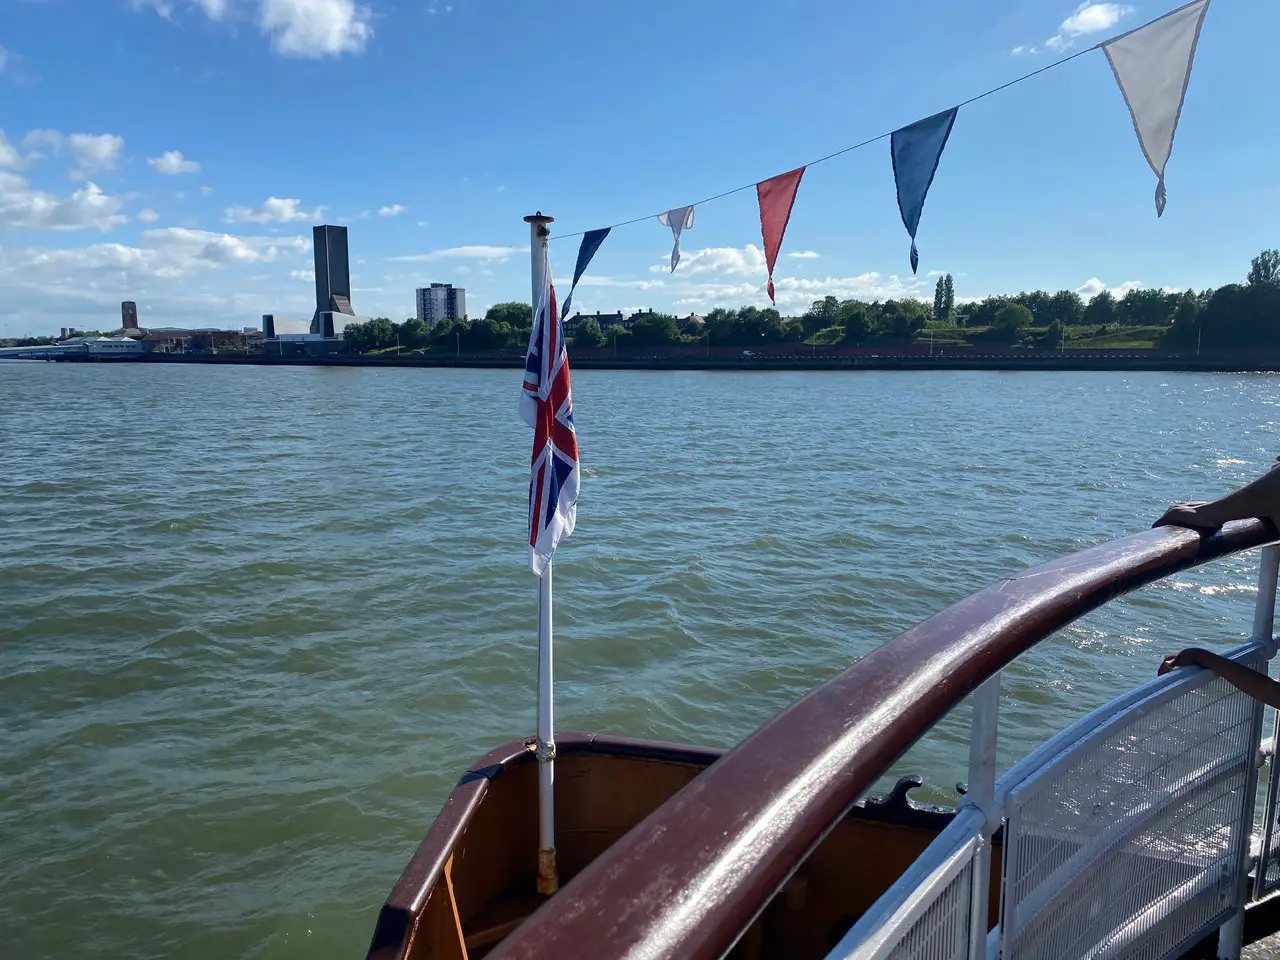 Flags fluttering on the breeze on the Mersey River Ferry